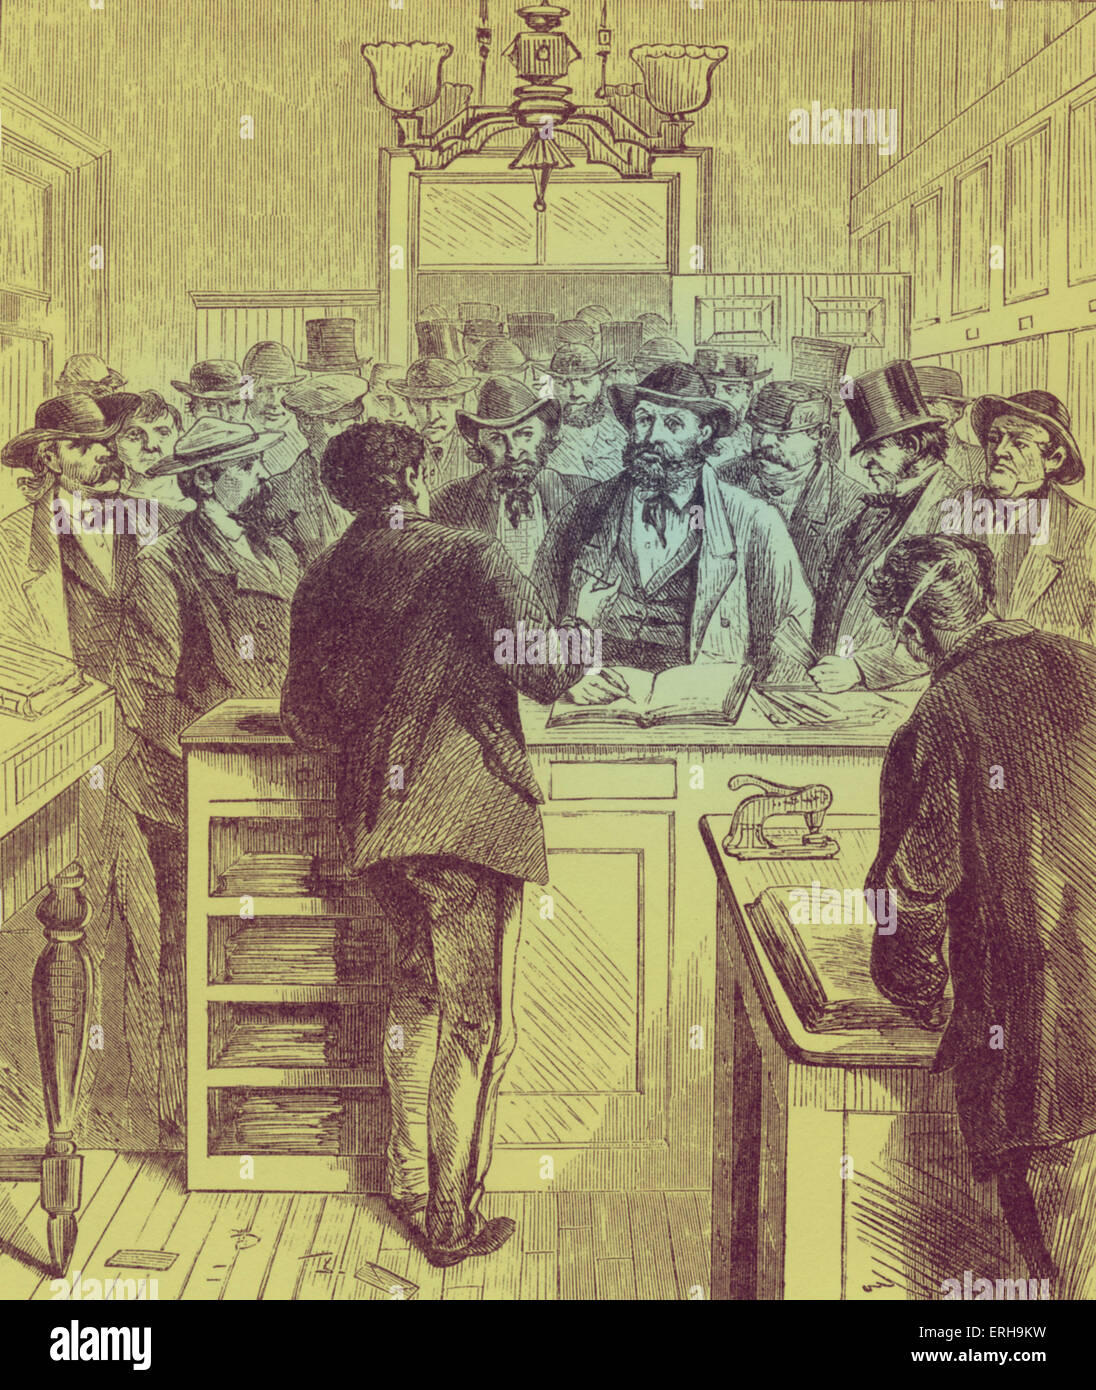 Immigrants applying for naturalisation in New York court. 19th century, USA. Illustration by Stanley Fox (dates unknown) Stock Photo